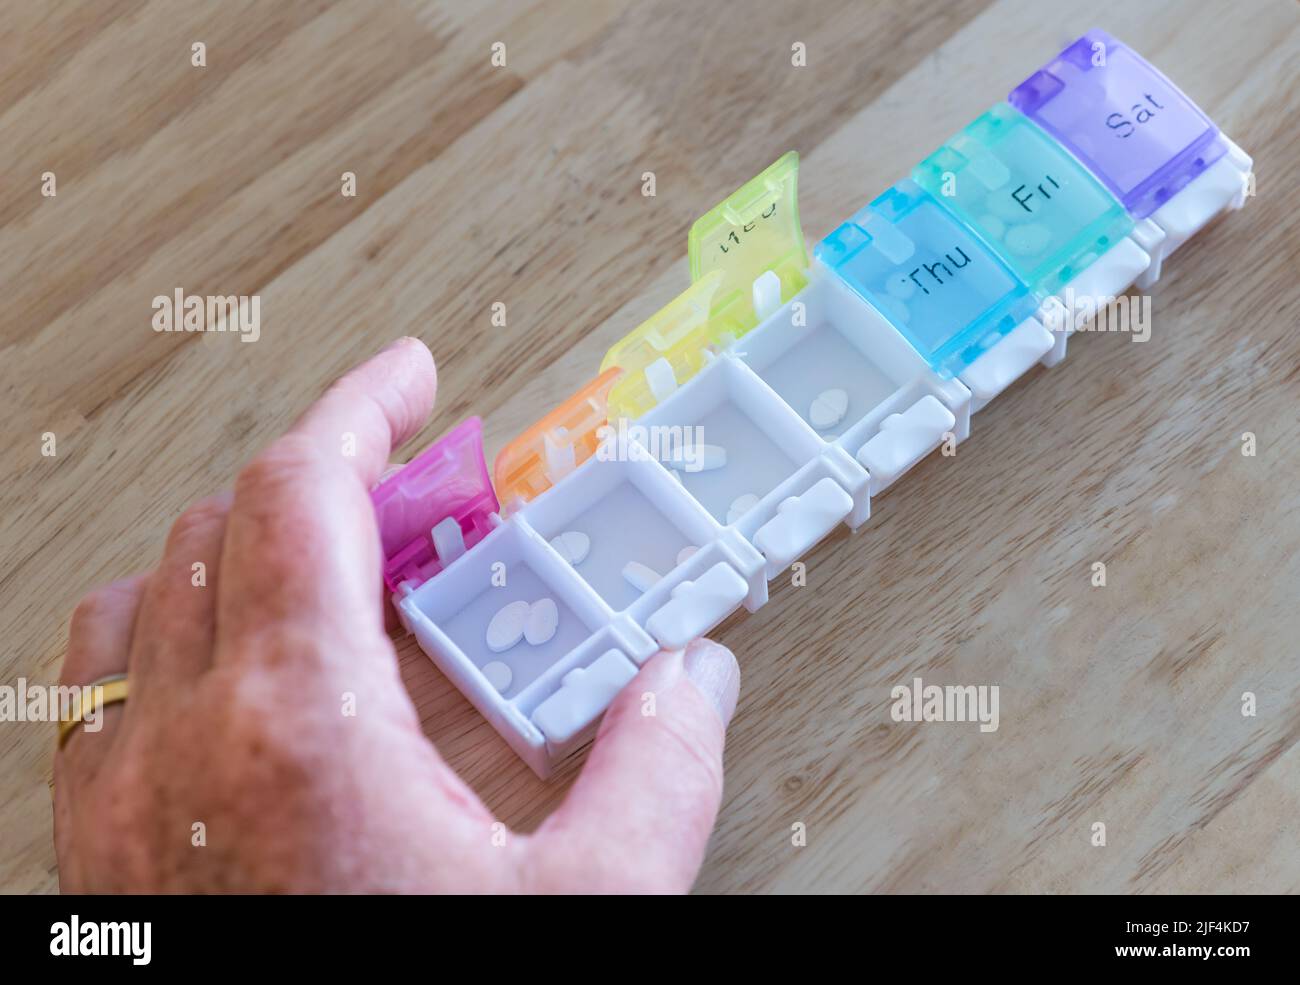 A man organising weekly medication tablets or pills in a pill organiser with days of the week marked, United Kingdom Stock Photo